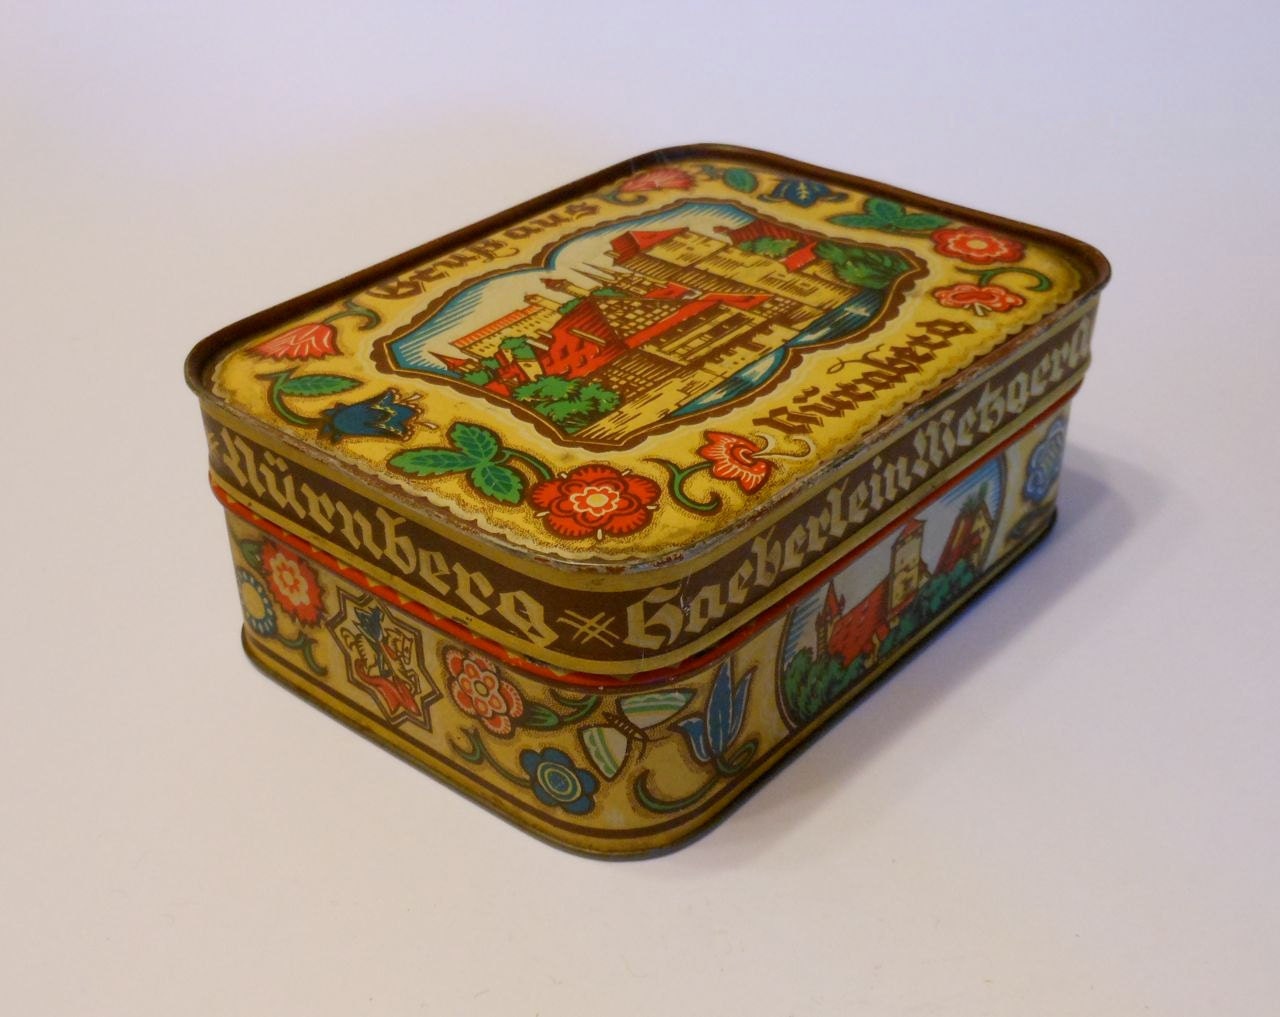 Vintage German Candy Tin by 2cool2toss on Etsy